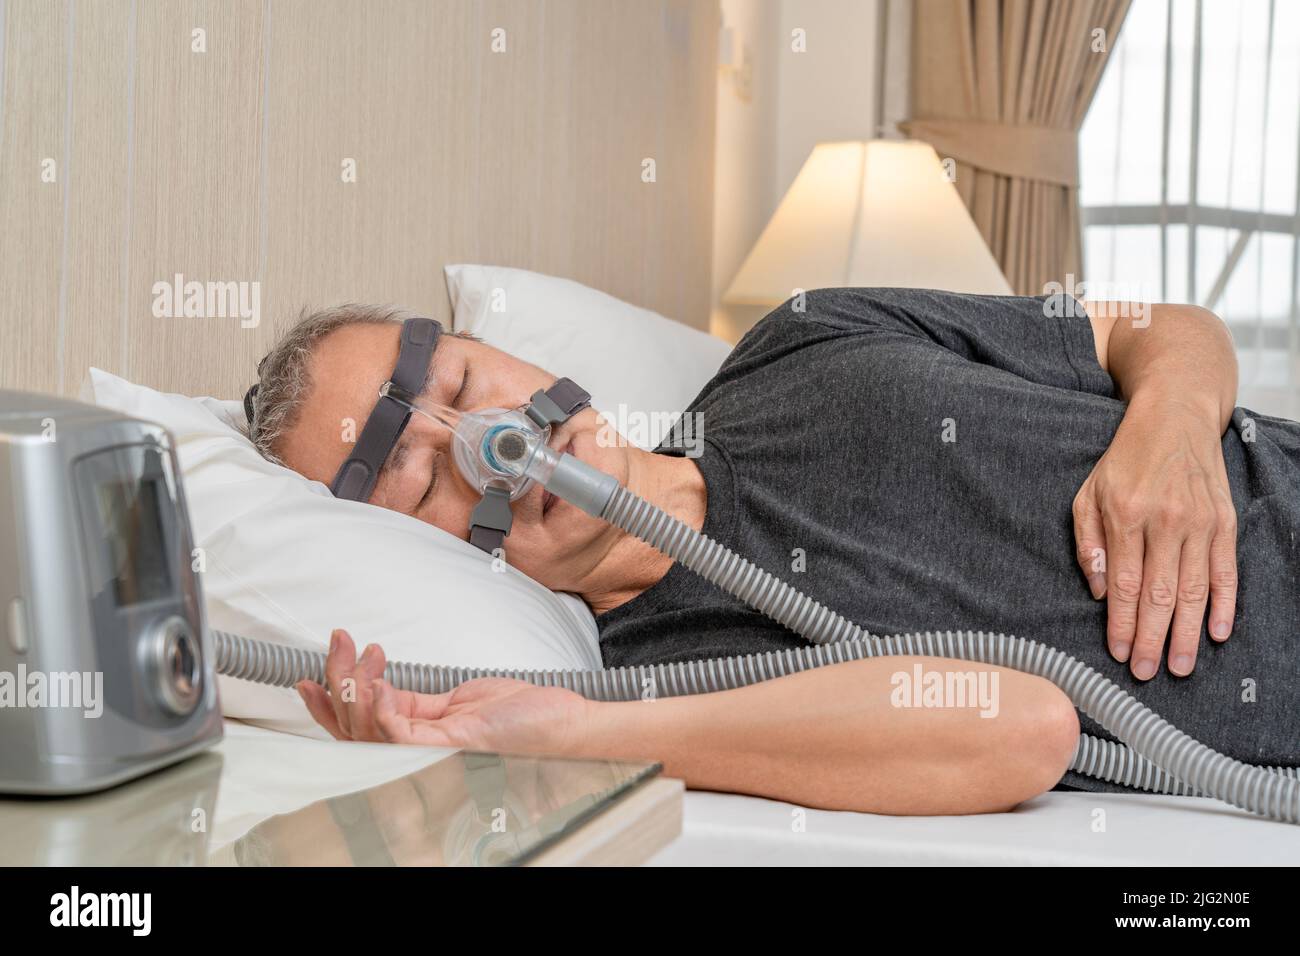 Middle age male with sleep apnea wearing CPAP headgear and mask while sleeping in his bedroom Stock Photo